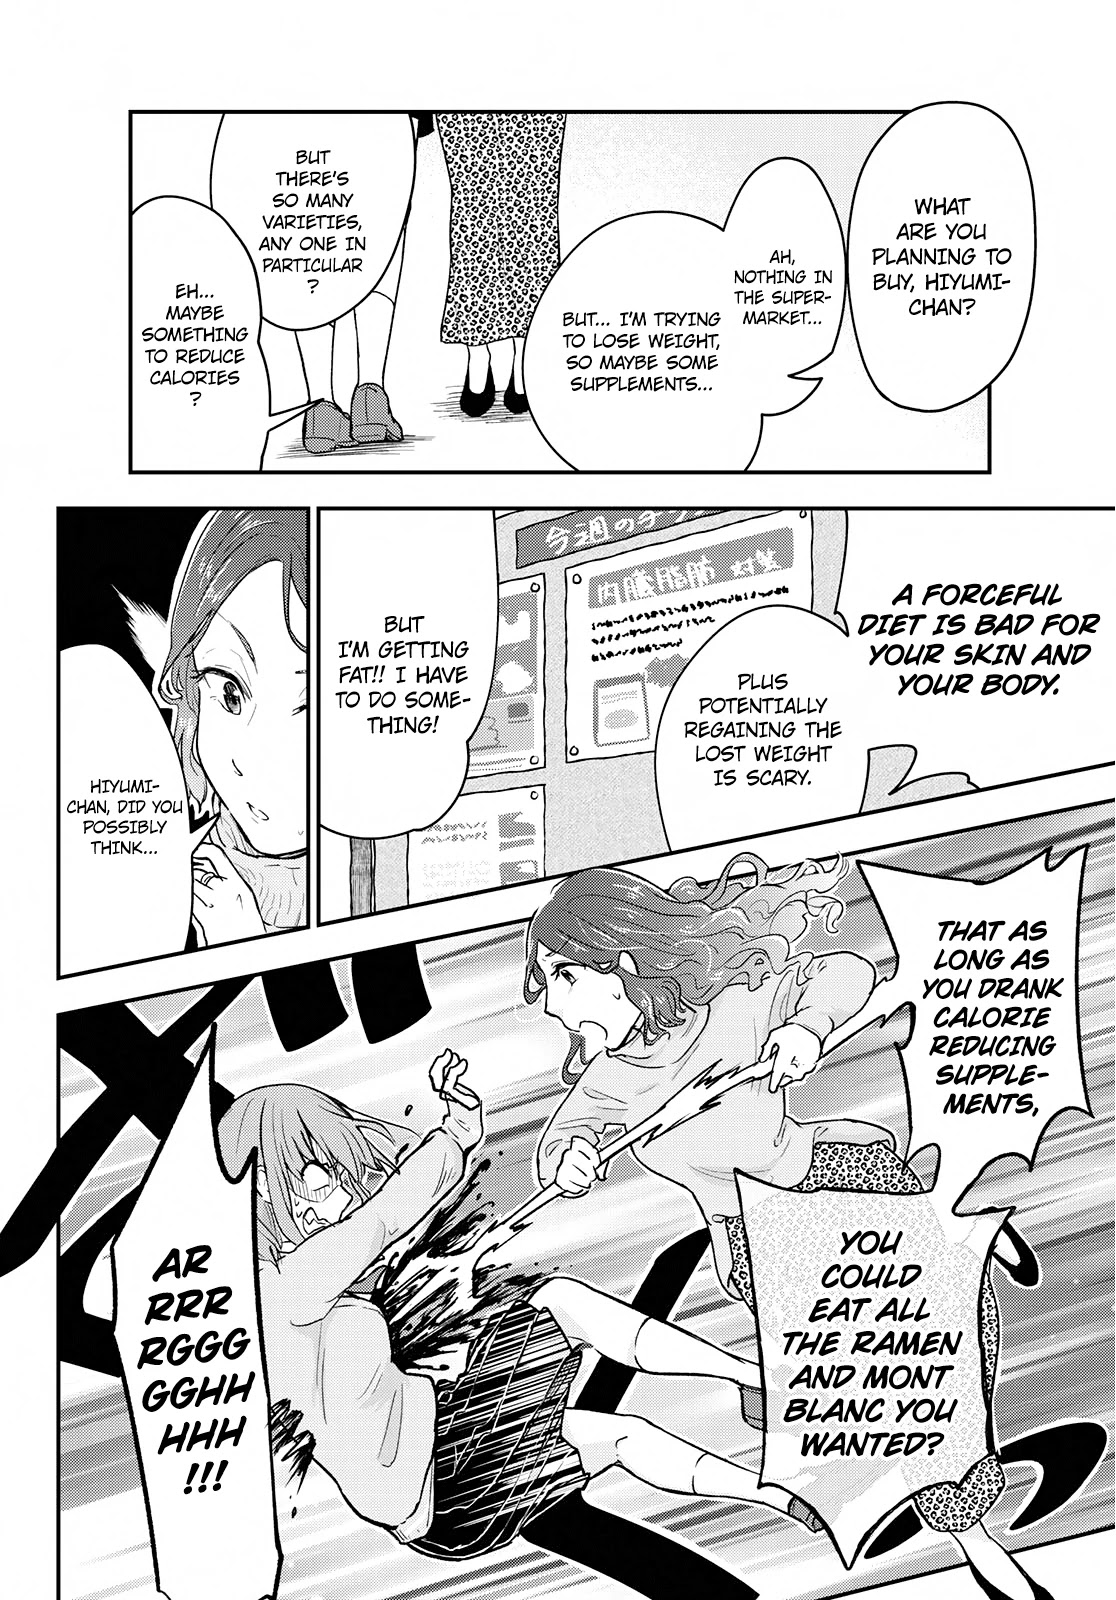 Hiyumi's Country Road Chapter 10 #13